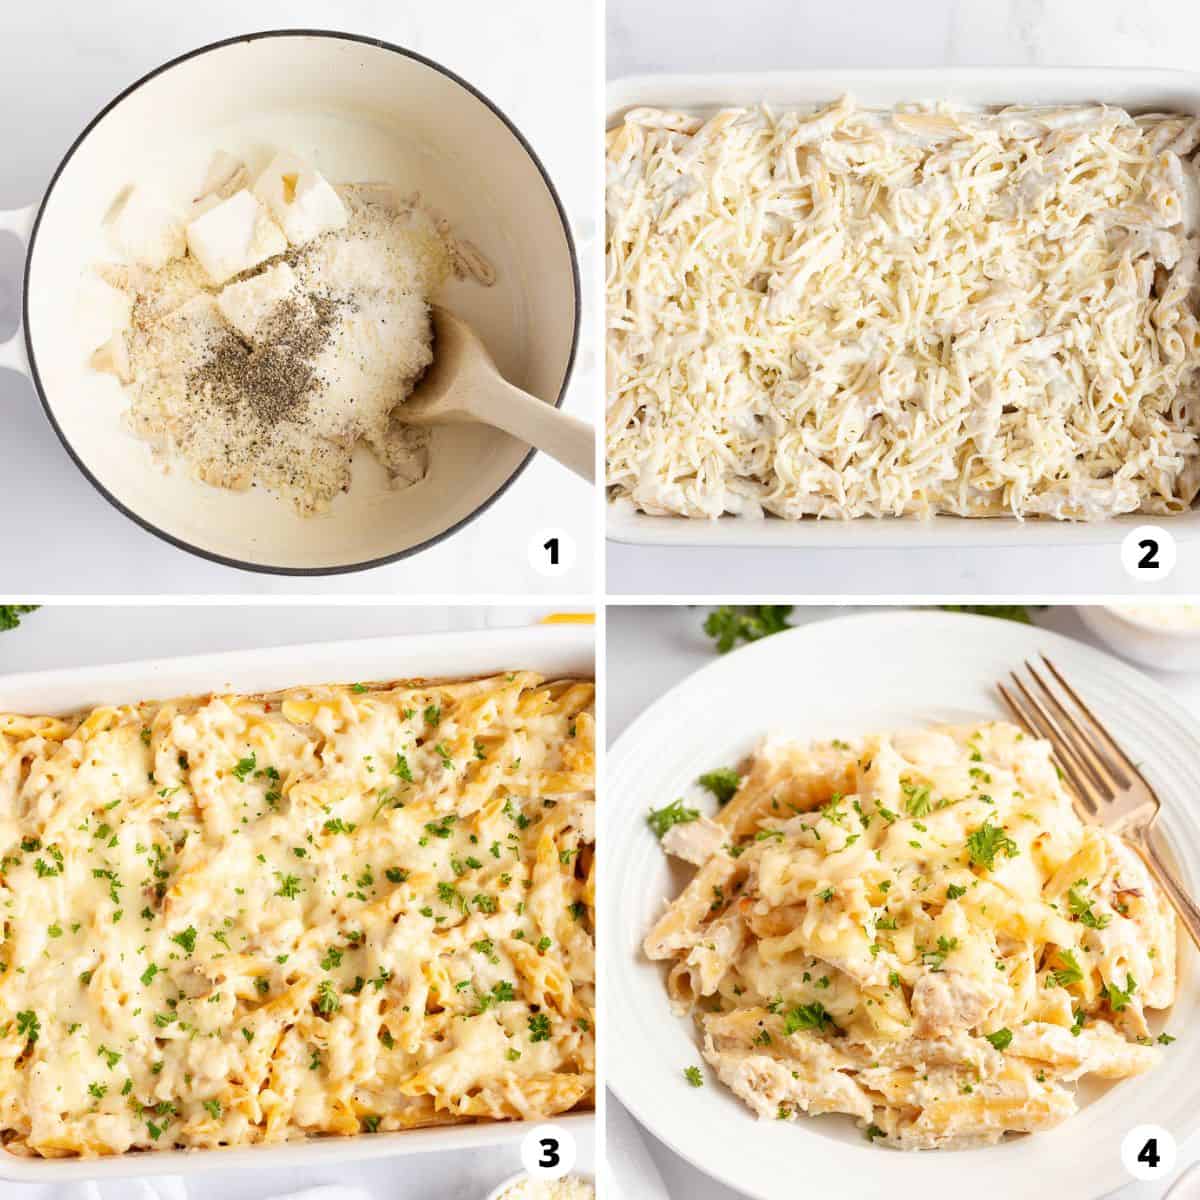 Showing how to make chicken alfredo bake in a collage.